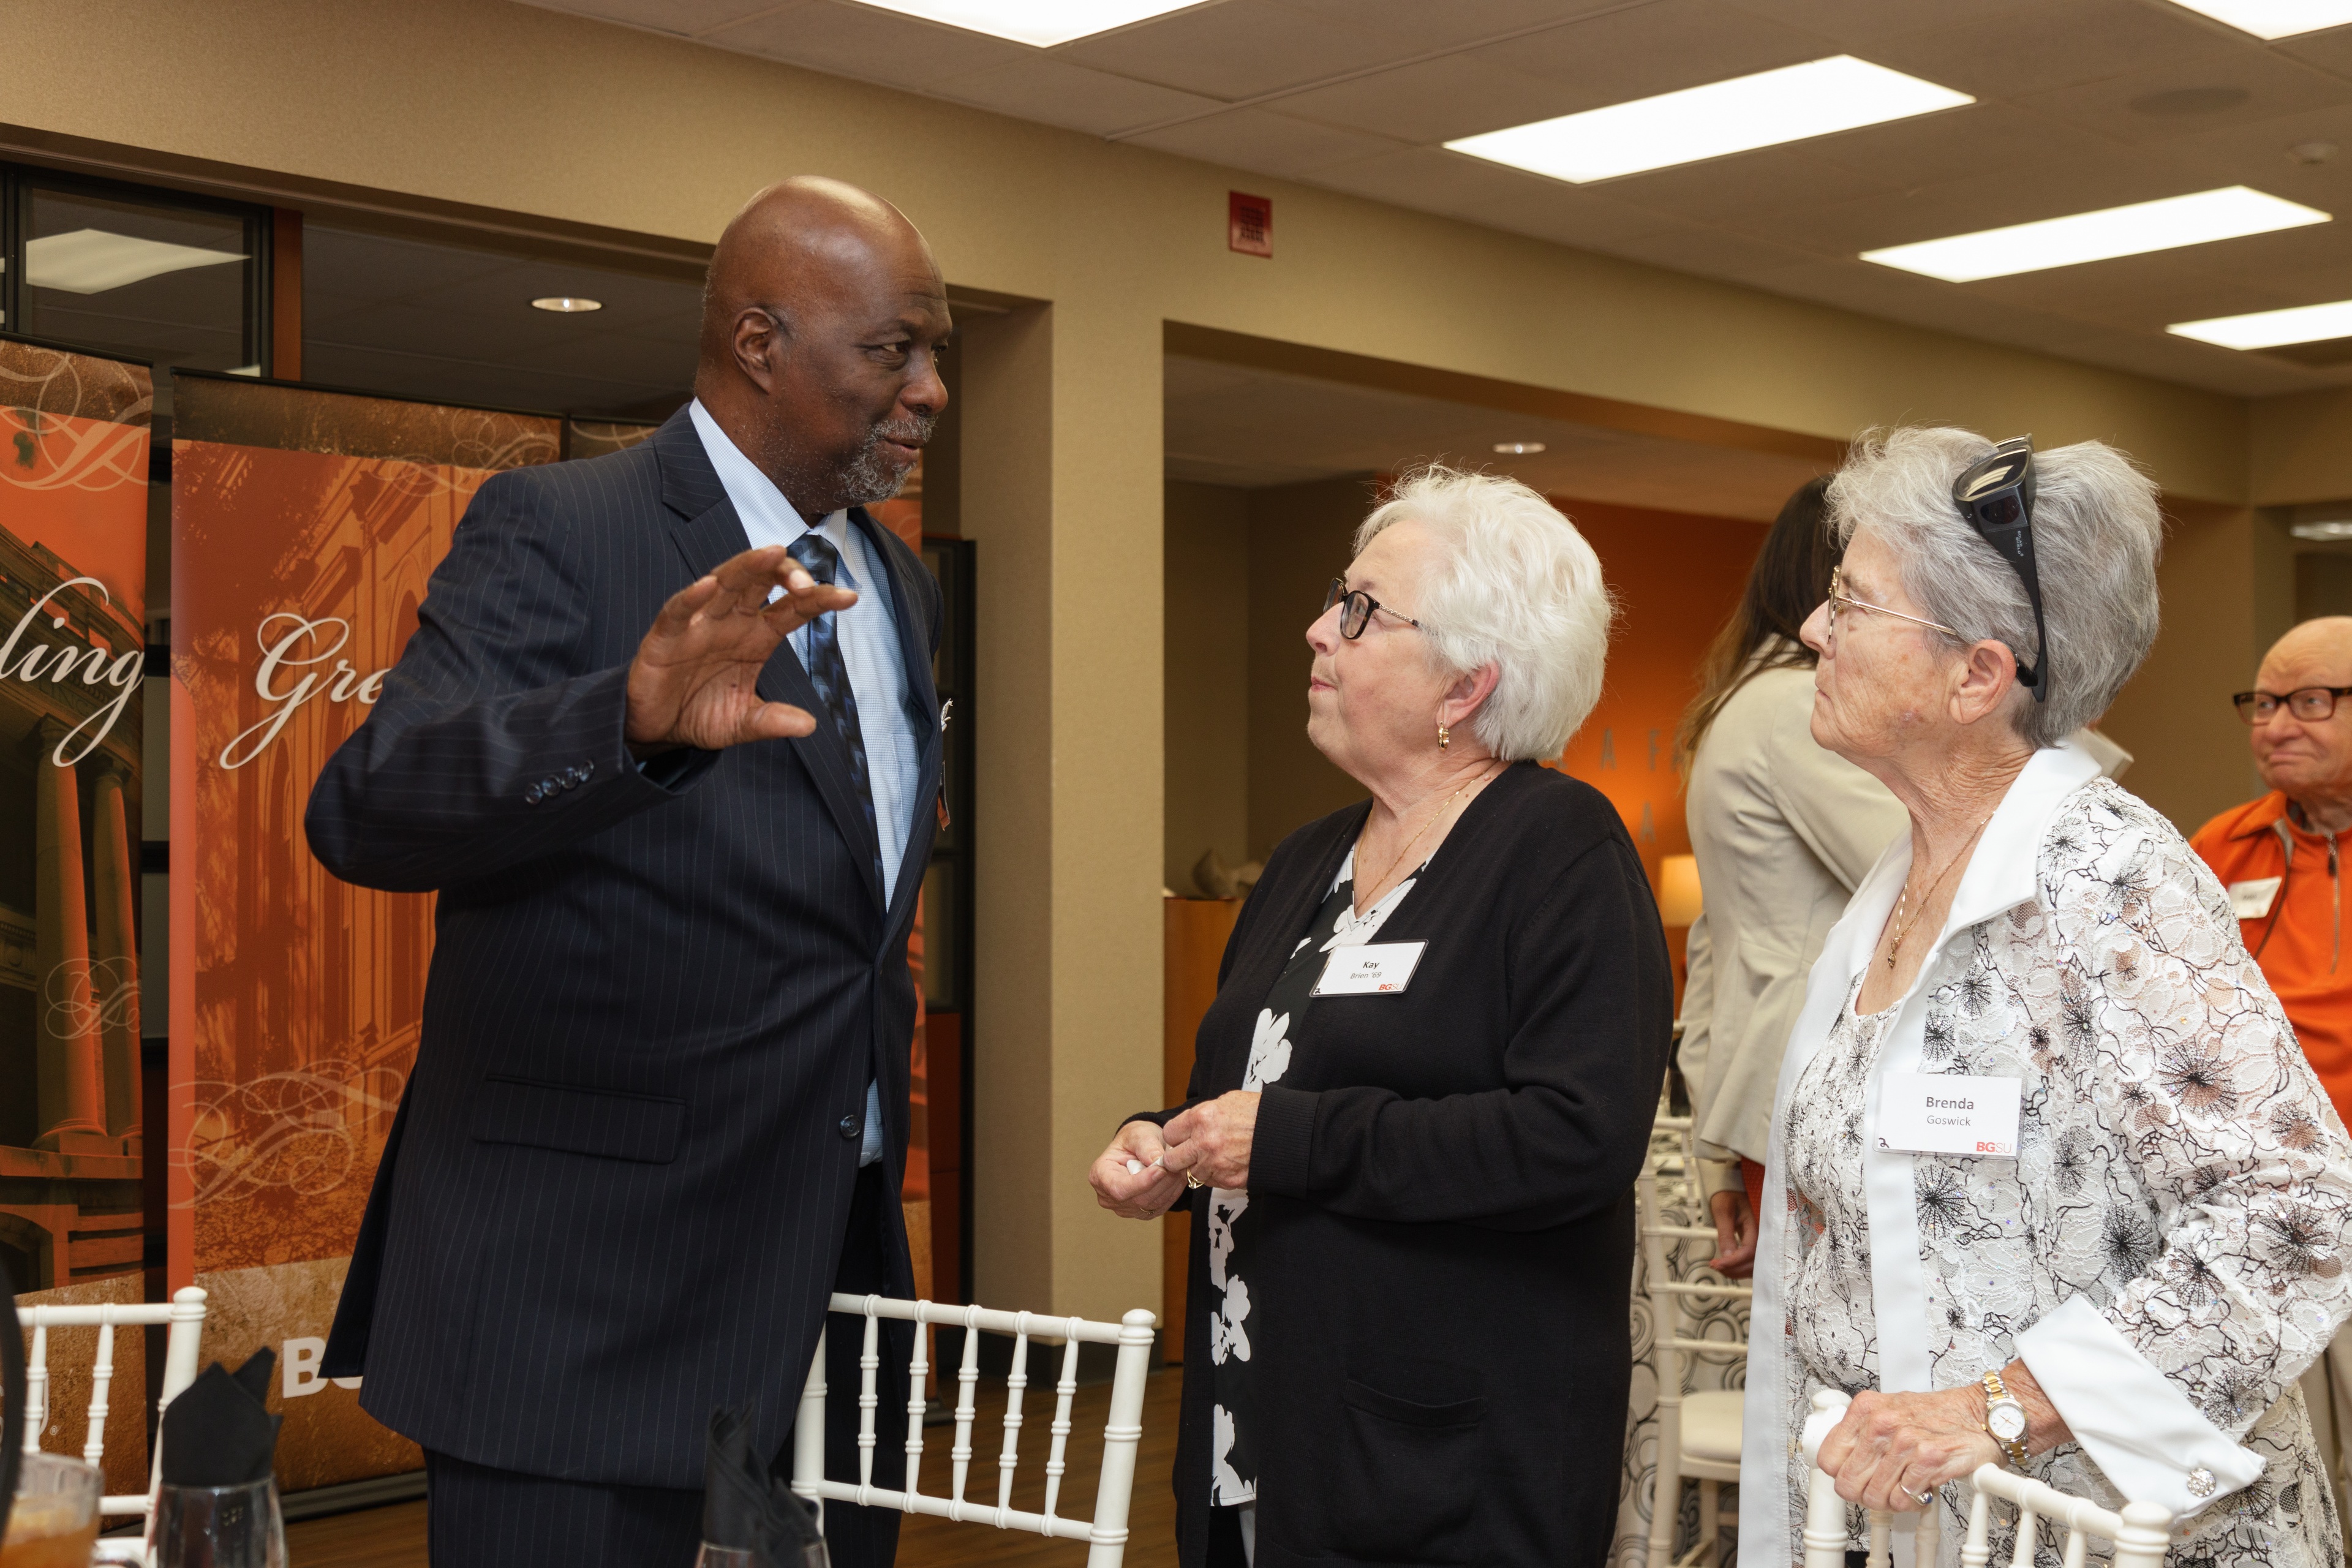 Dr. Joe B. Whitehead Jr. speaks with two women during a Golden Falcon reception